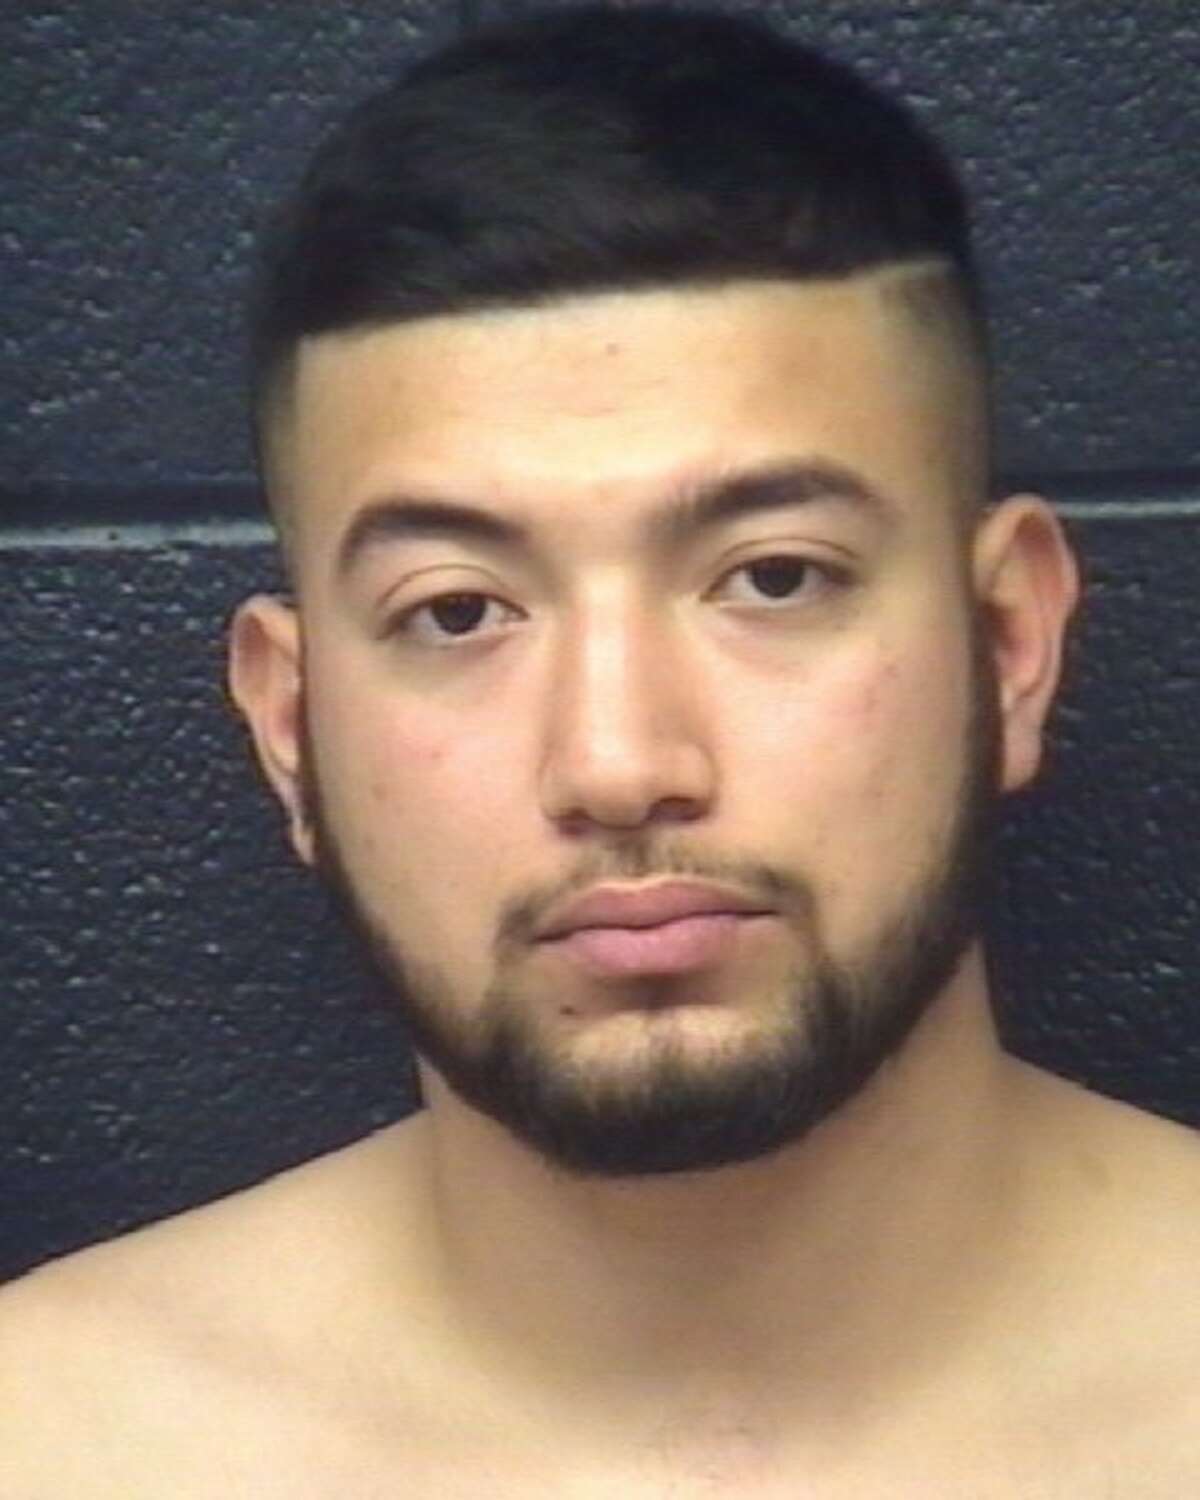 Alexis Martinez, 23, was charged with aggravated assault with a deadly weapon.